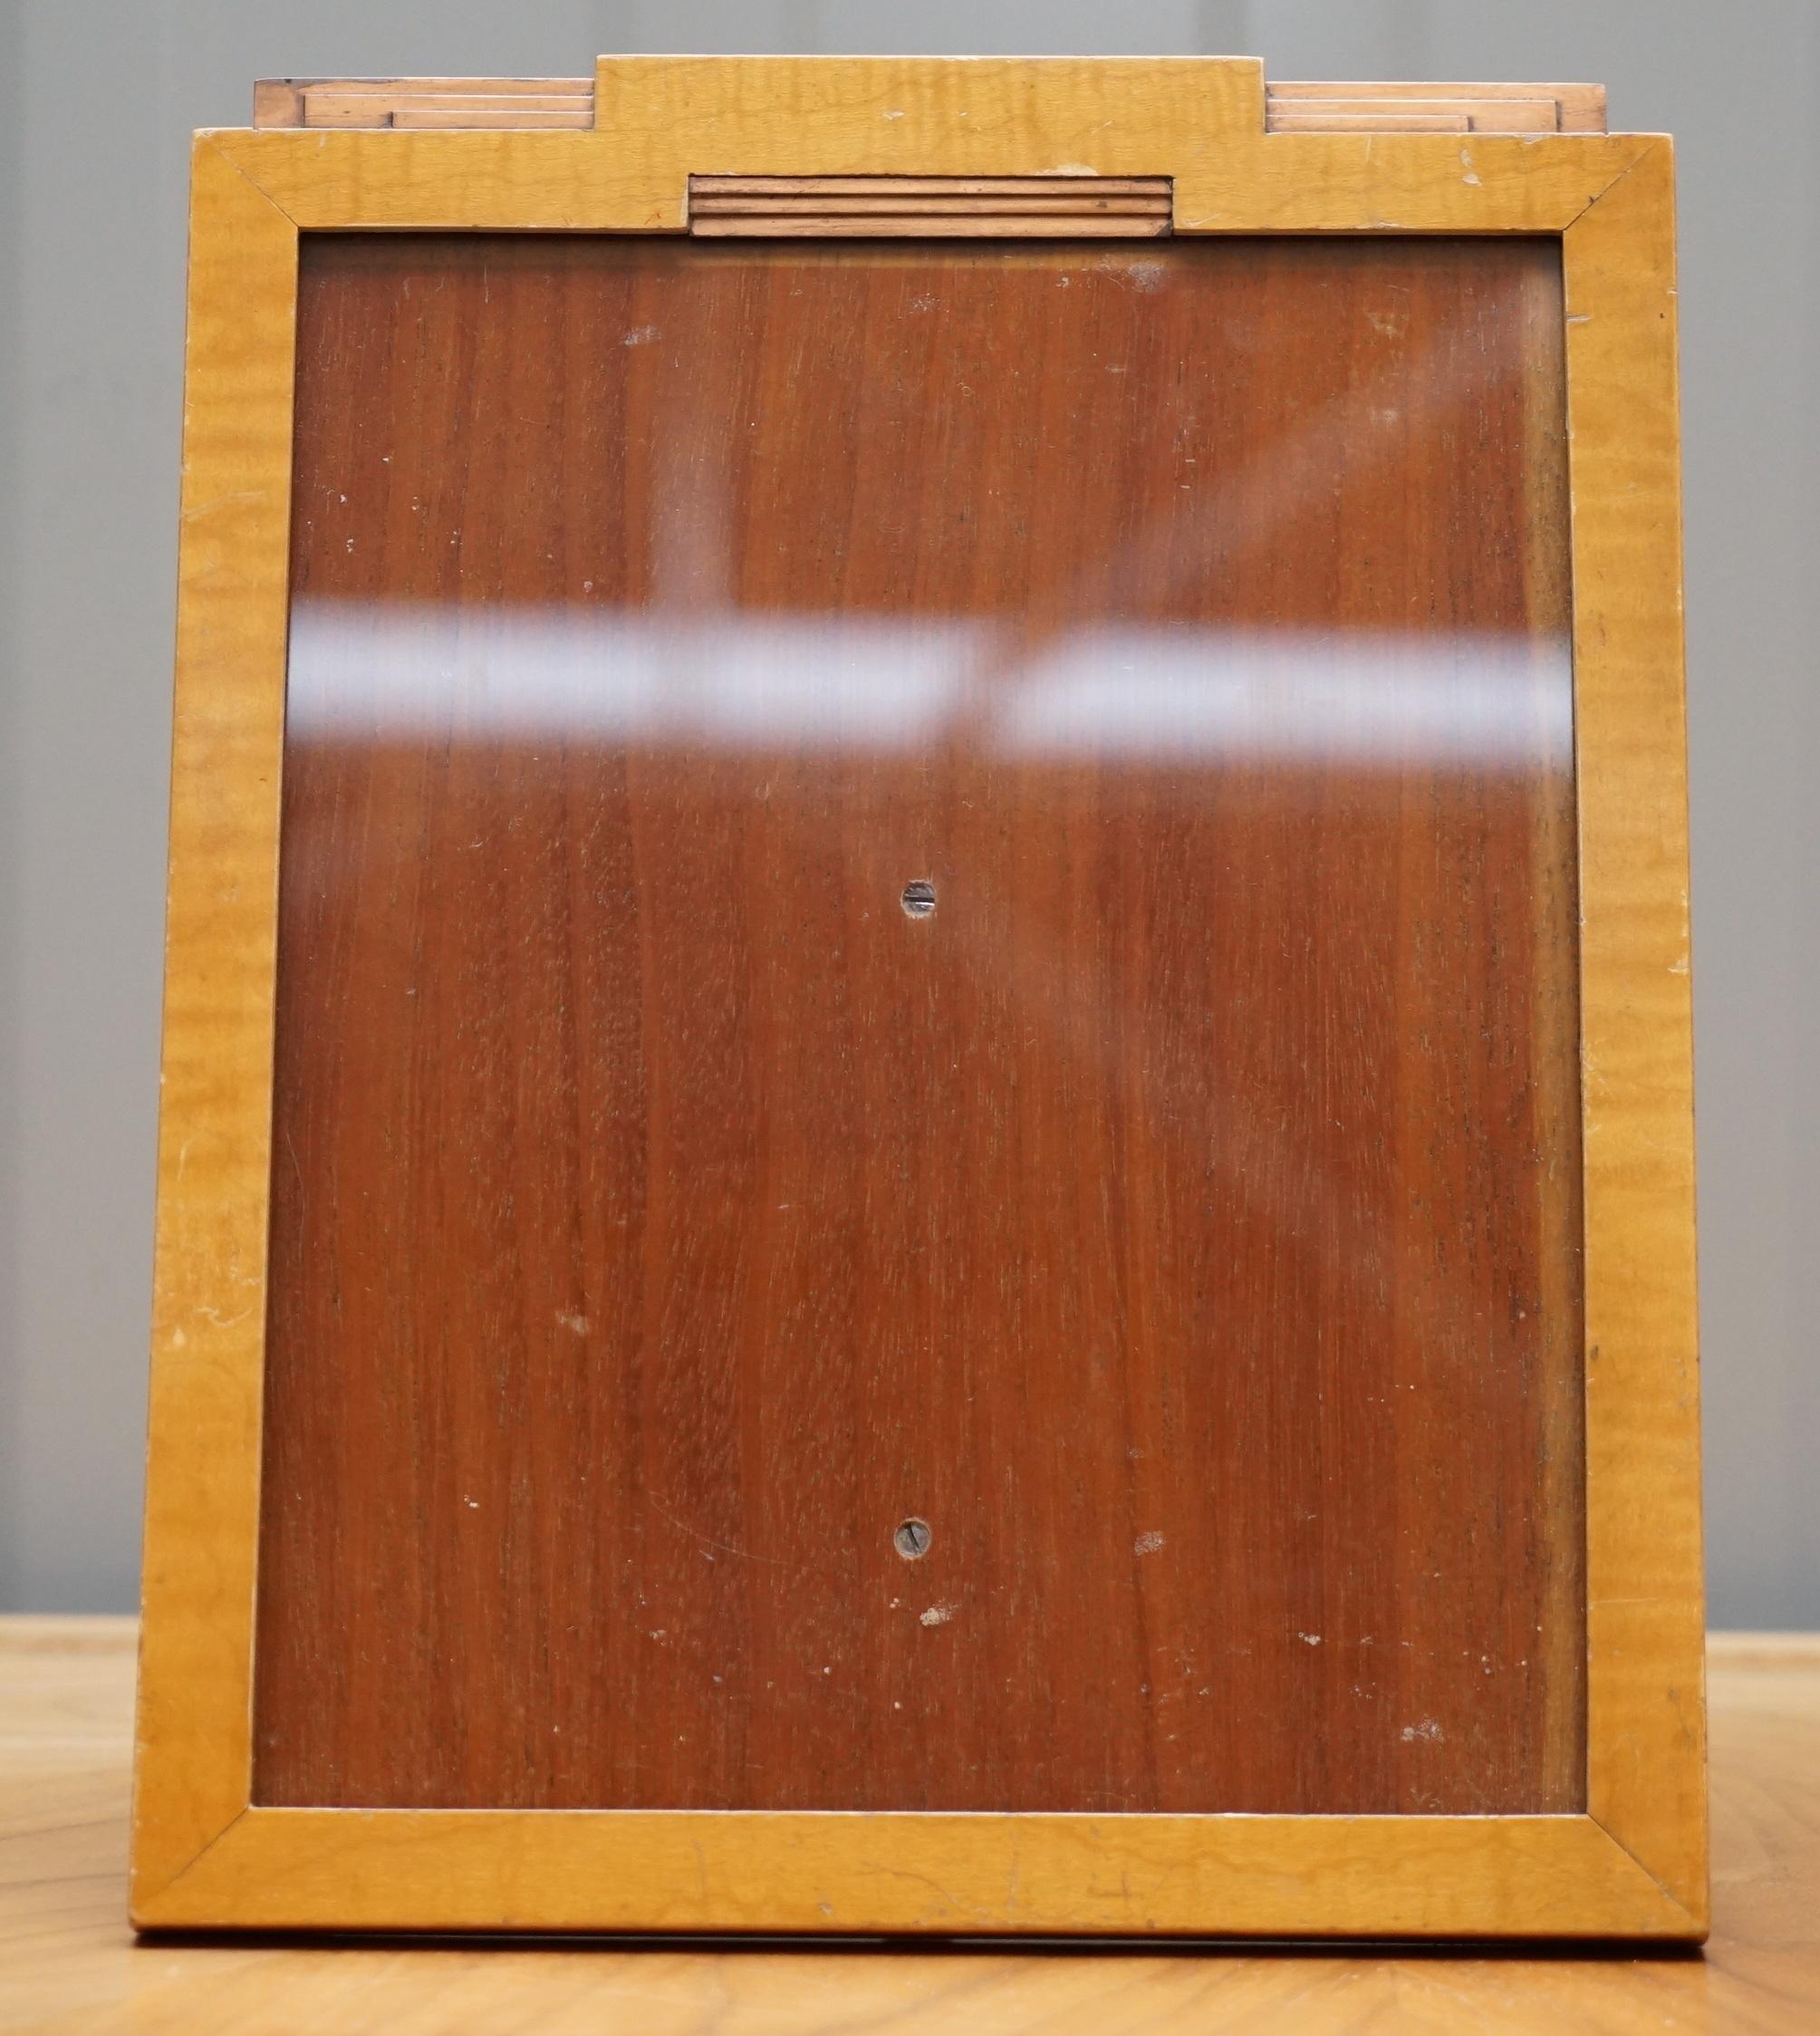 We are delighted to offer for sale this stunning Vintage American Art Deco satinwood picture frame from Asprey London

All were purchased from Asprey London, this one is stamped to the back

This is based on the American Art deco grand buildings